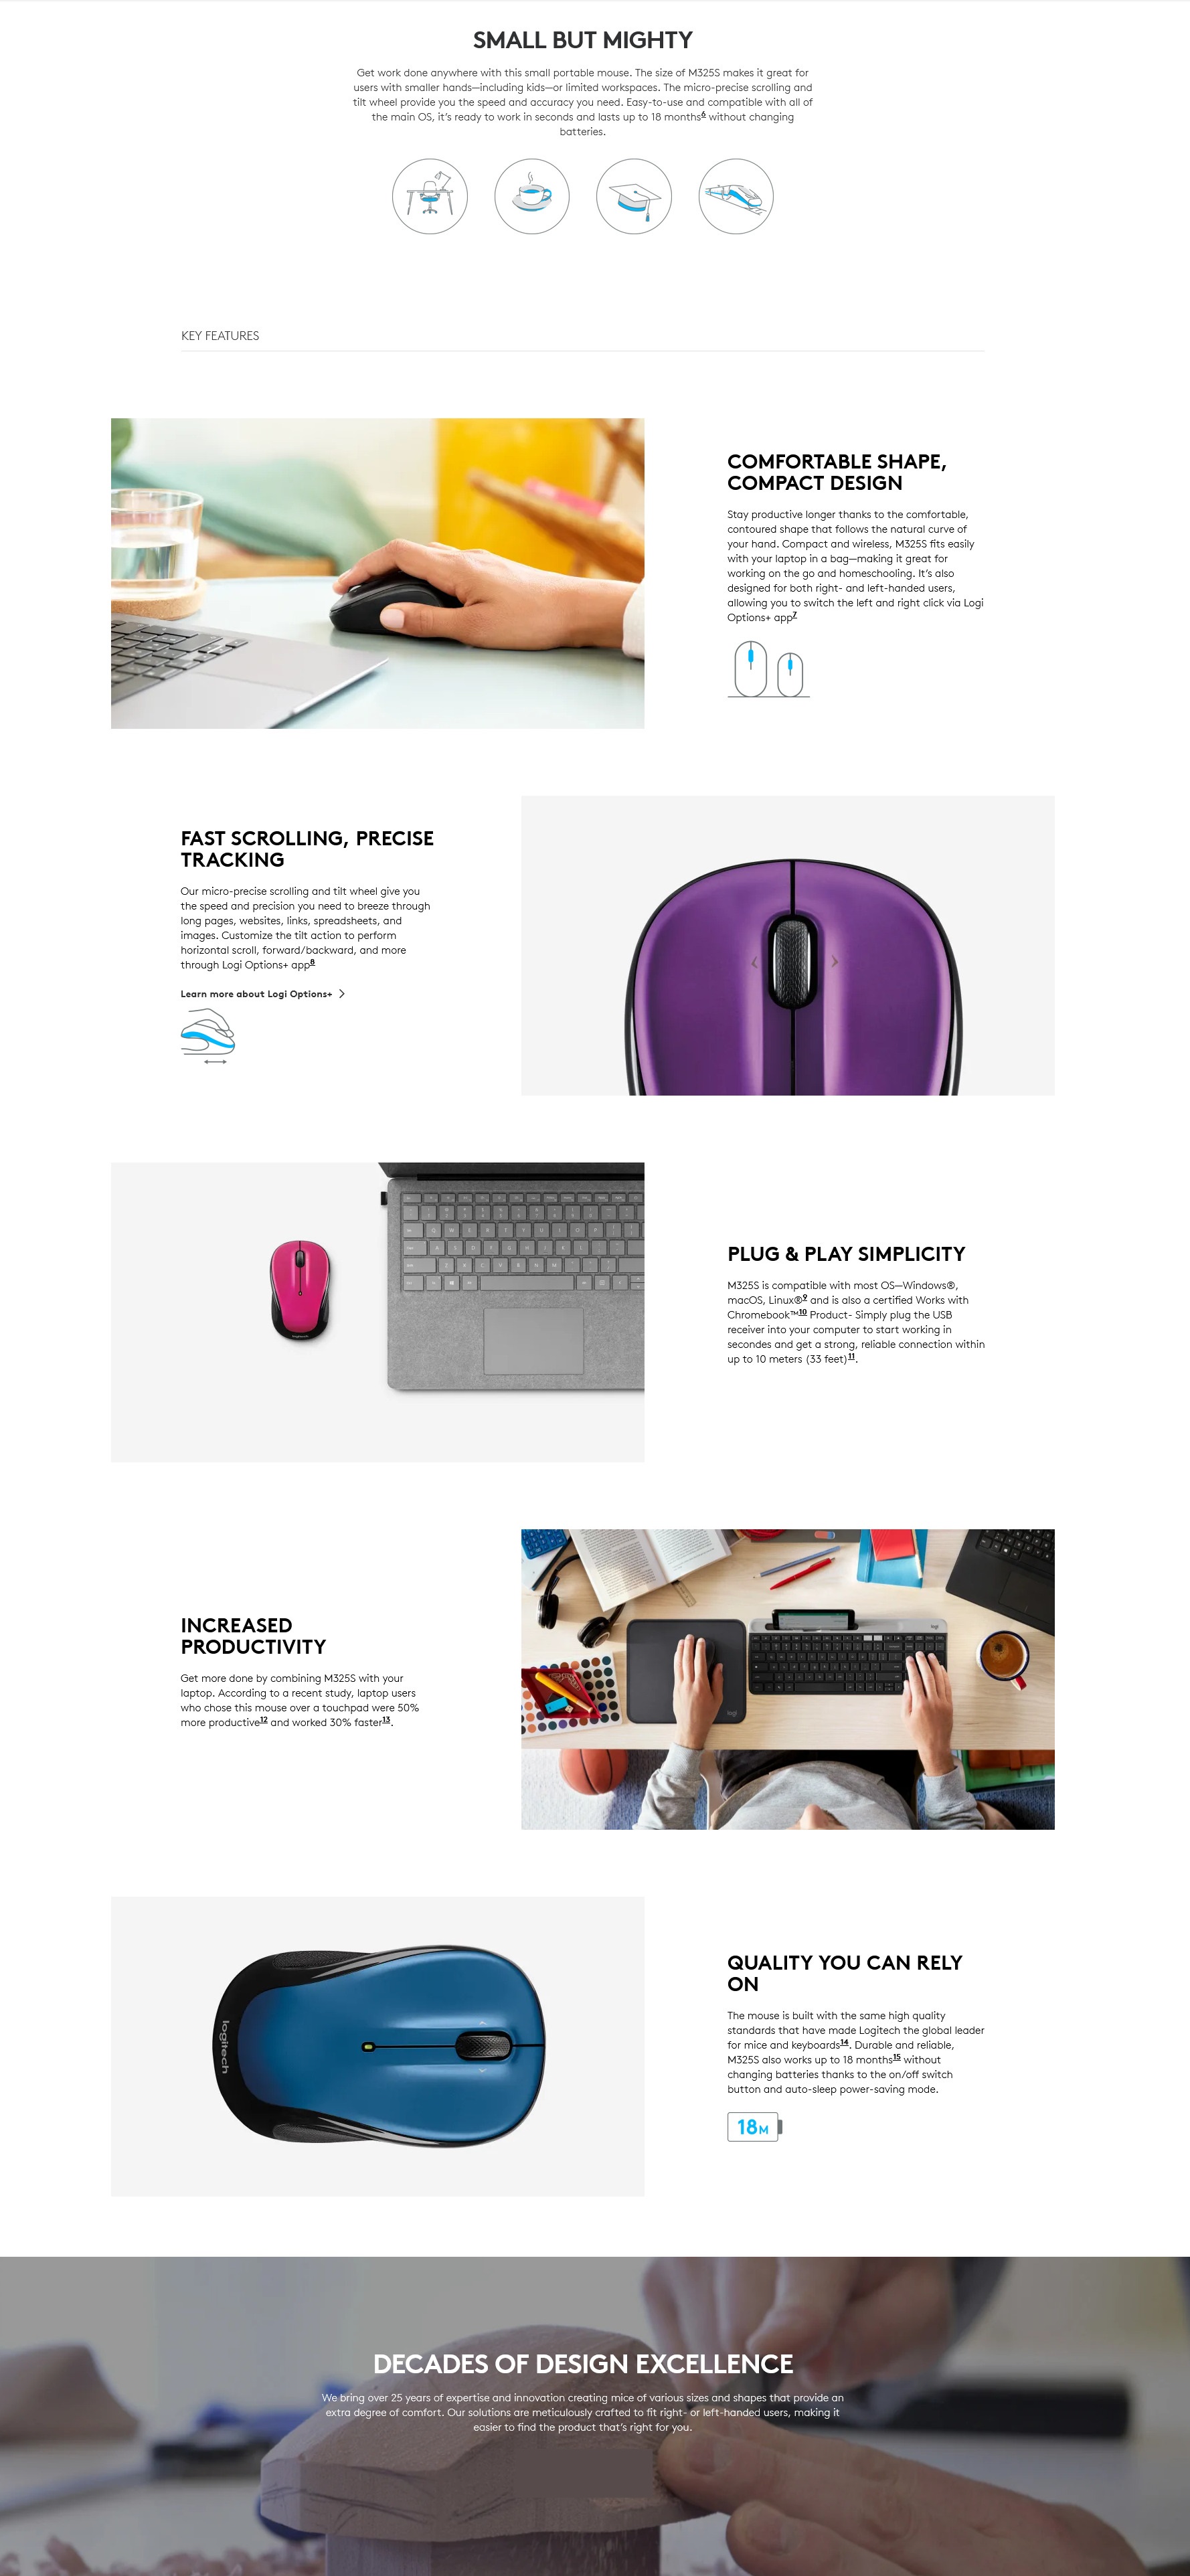 A large marketing image providing additional information about the product Logitech Wireless Mouse M325s - Dark Silver - Additional alt info not provided